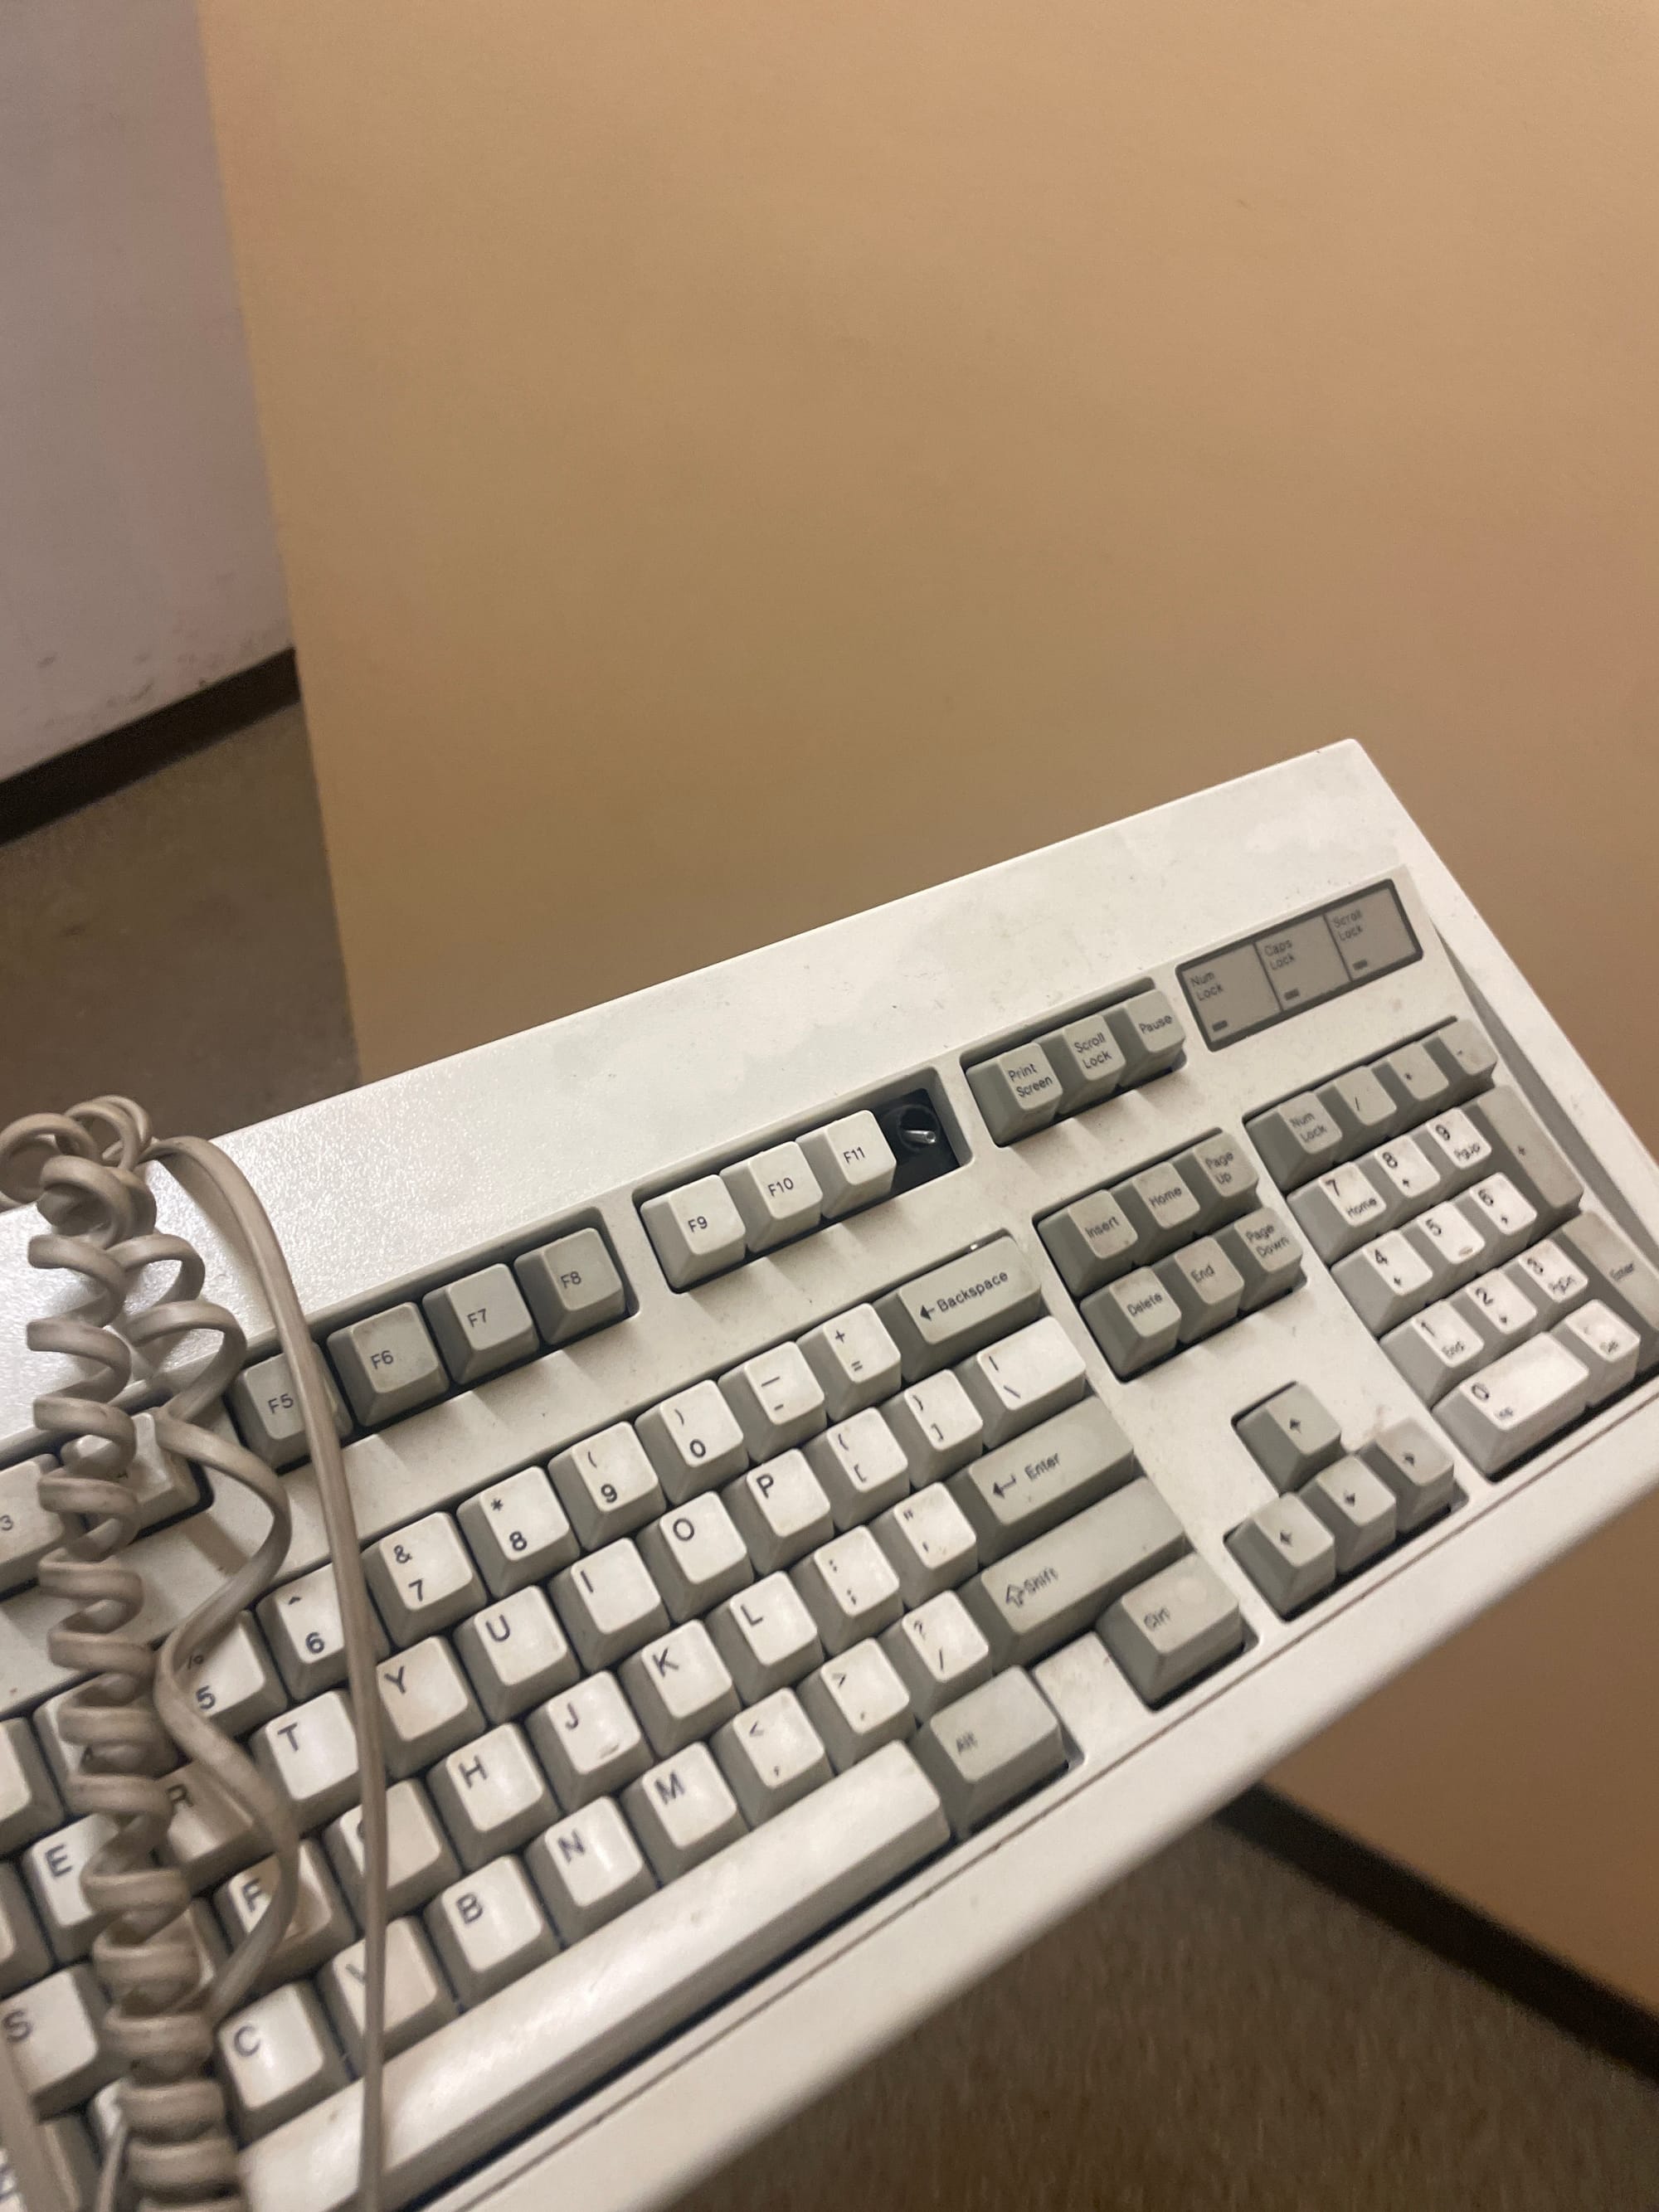 Dirty keyboard held close to camera, right half of keyboard visible, F12 keycap missing. White keyboard with some keys gray.